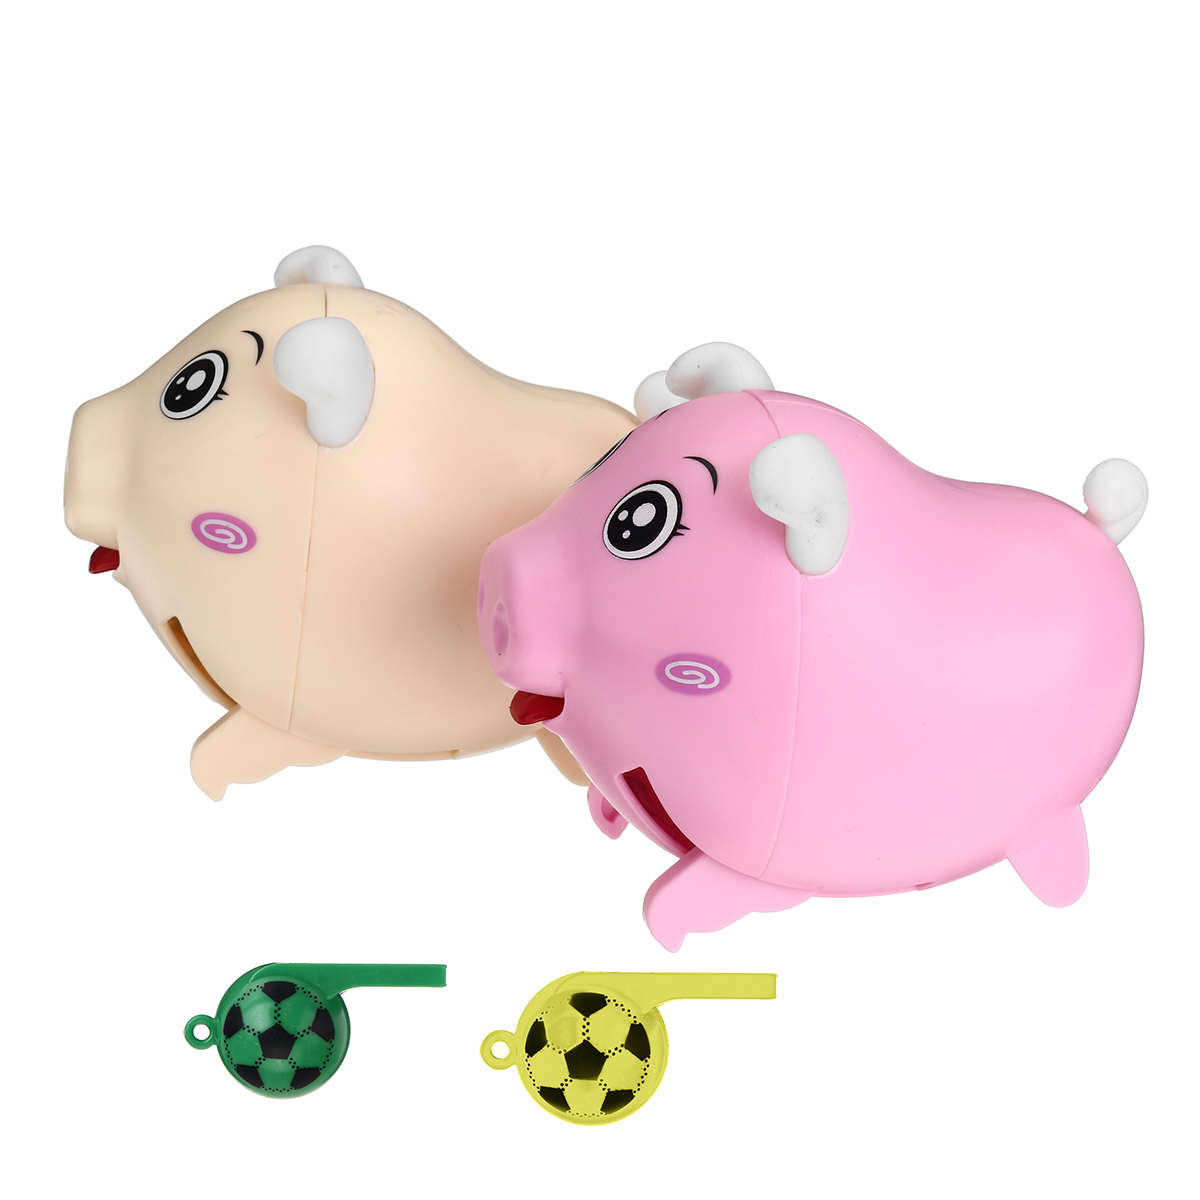 Kids-Toys-Animals-Sound-Induction-Whistling-Pig-Electronic-Pig-Interactive-Walking-Electronic-Toy-1662056-3